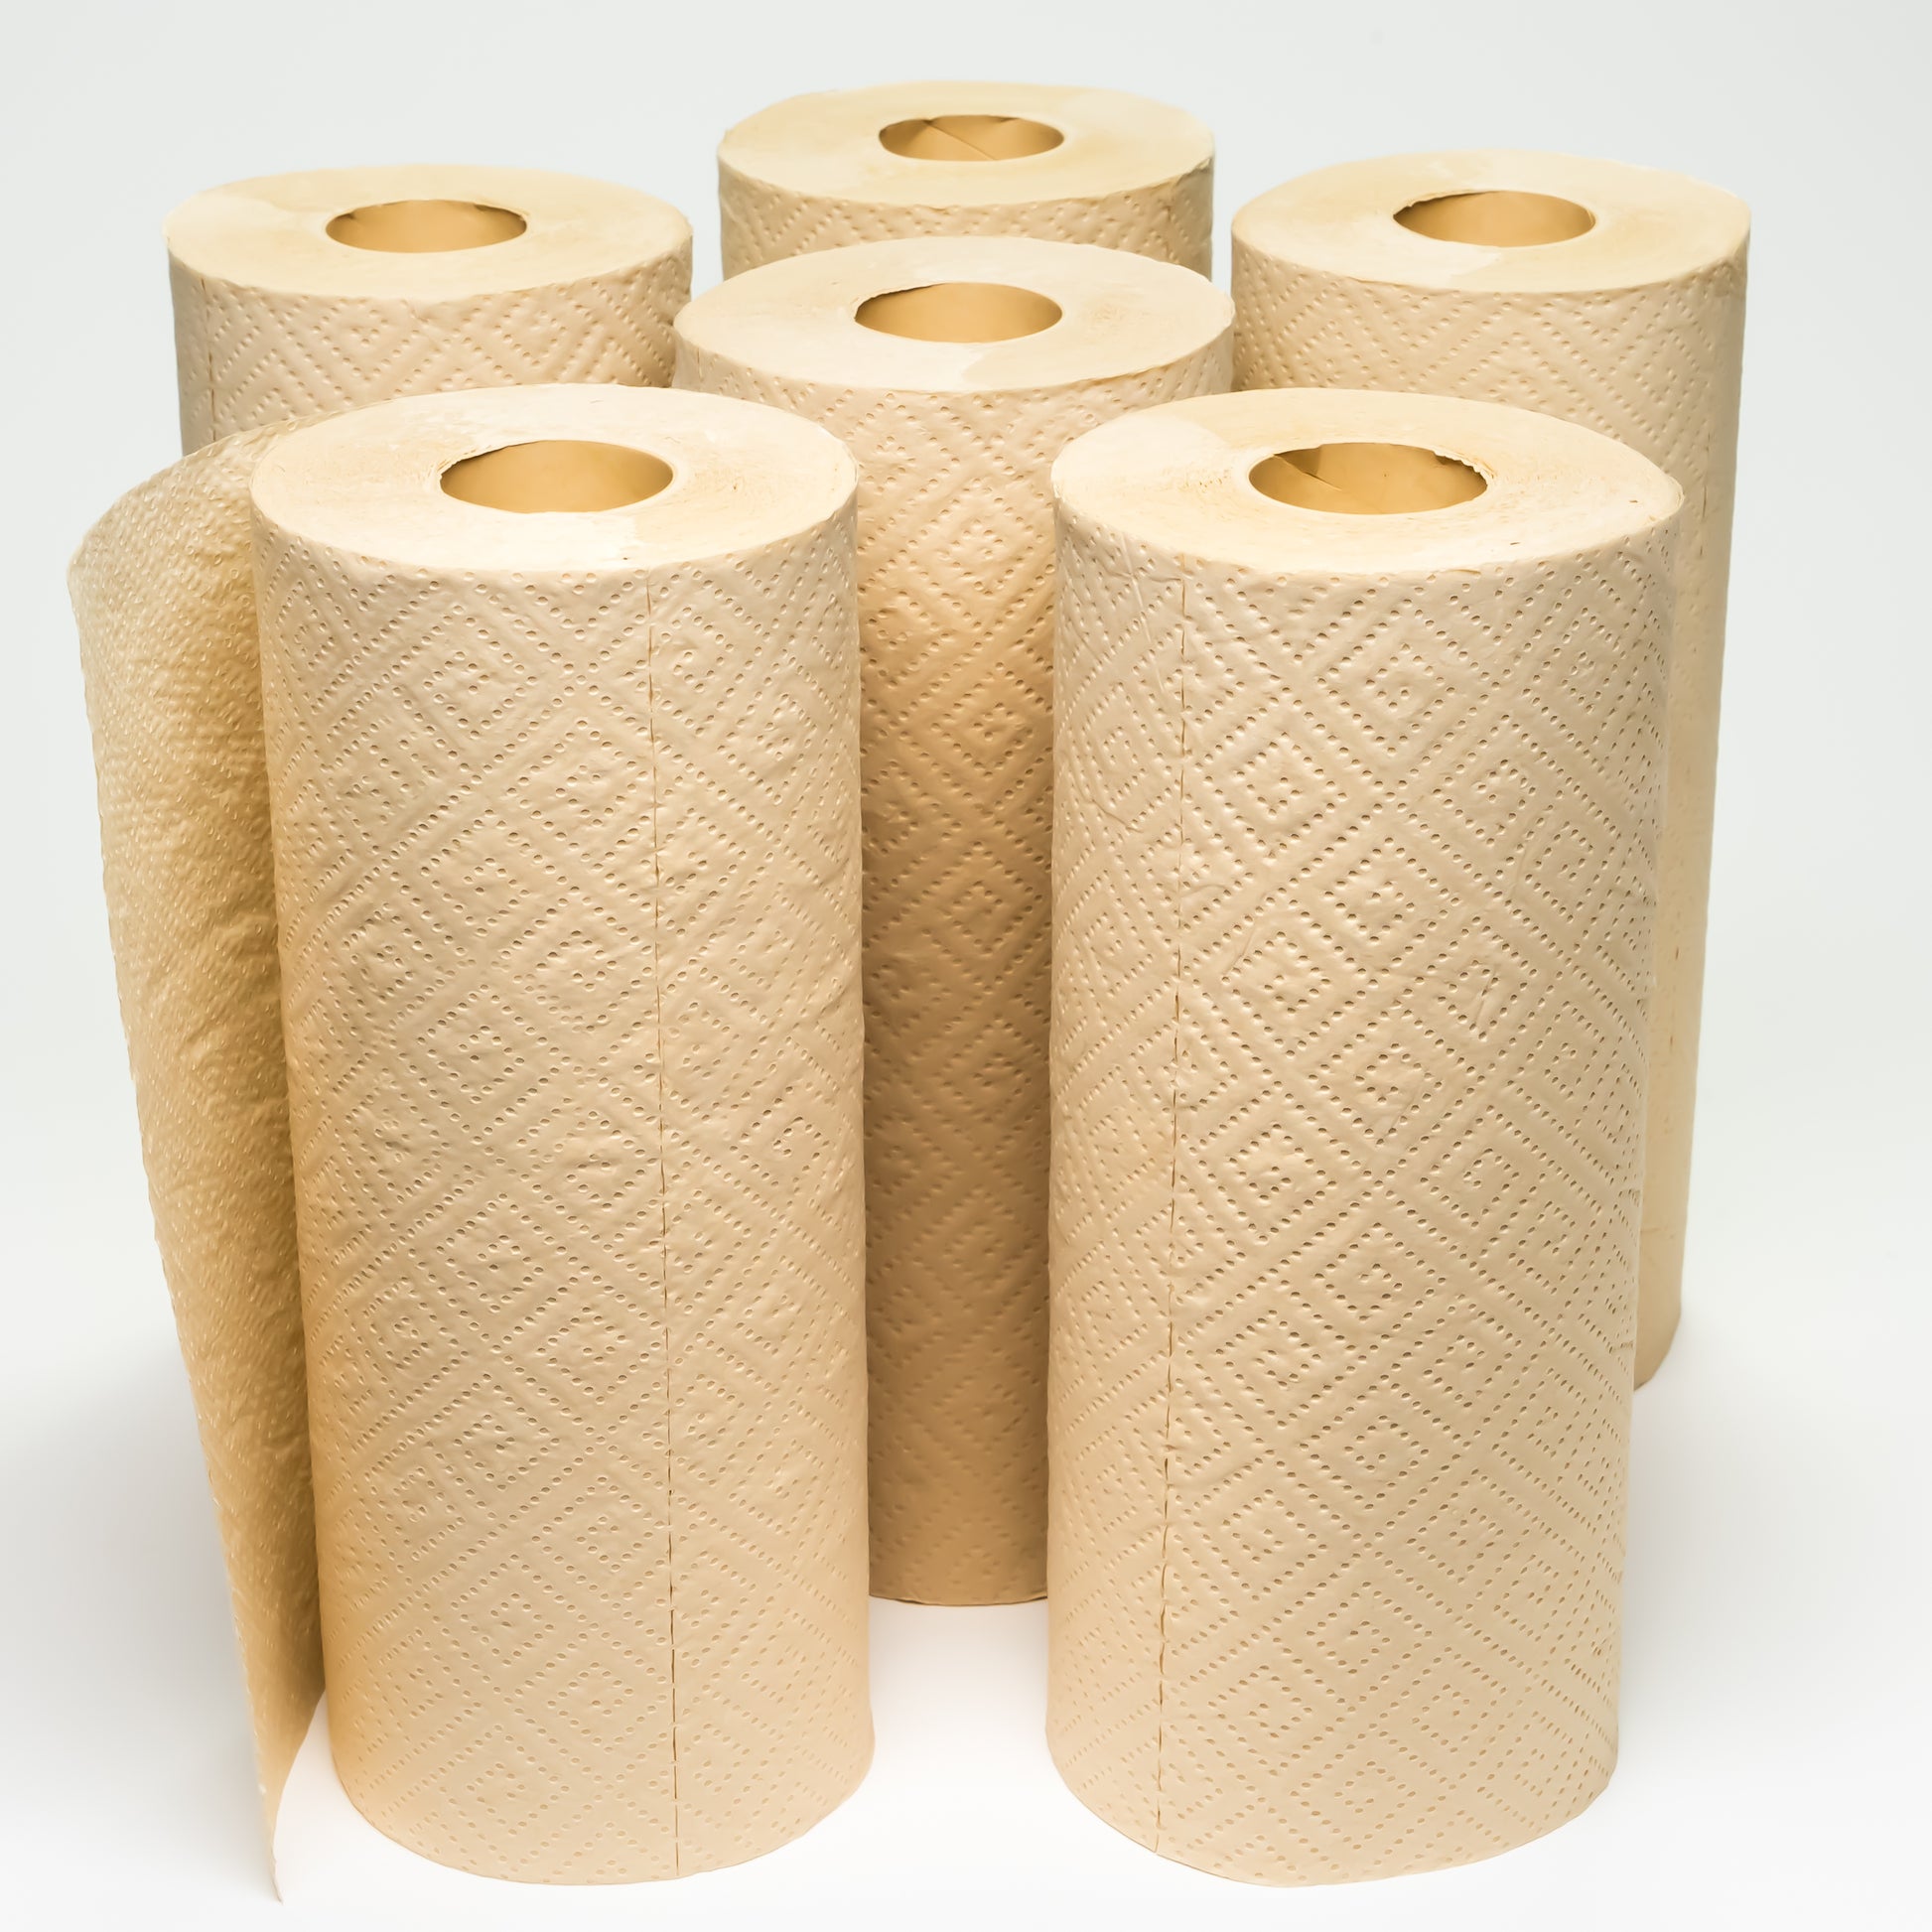 bamboo kitchen towels